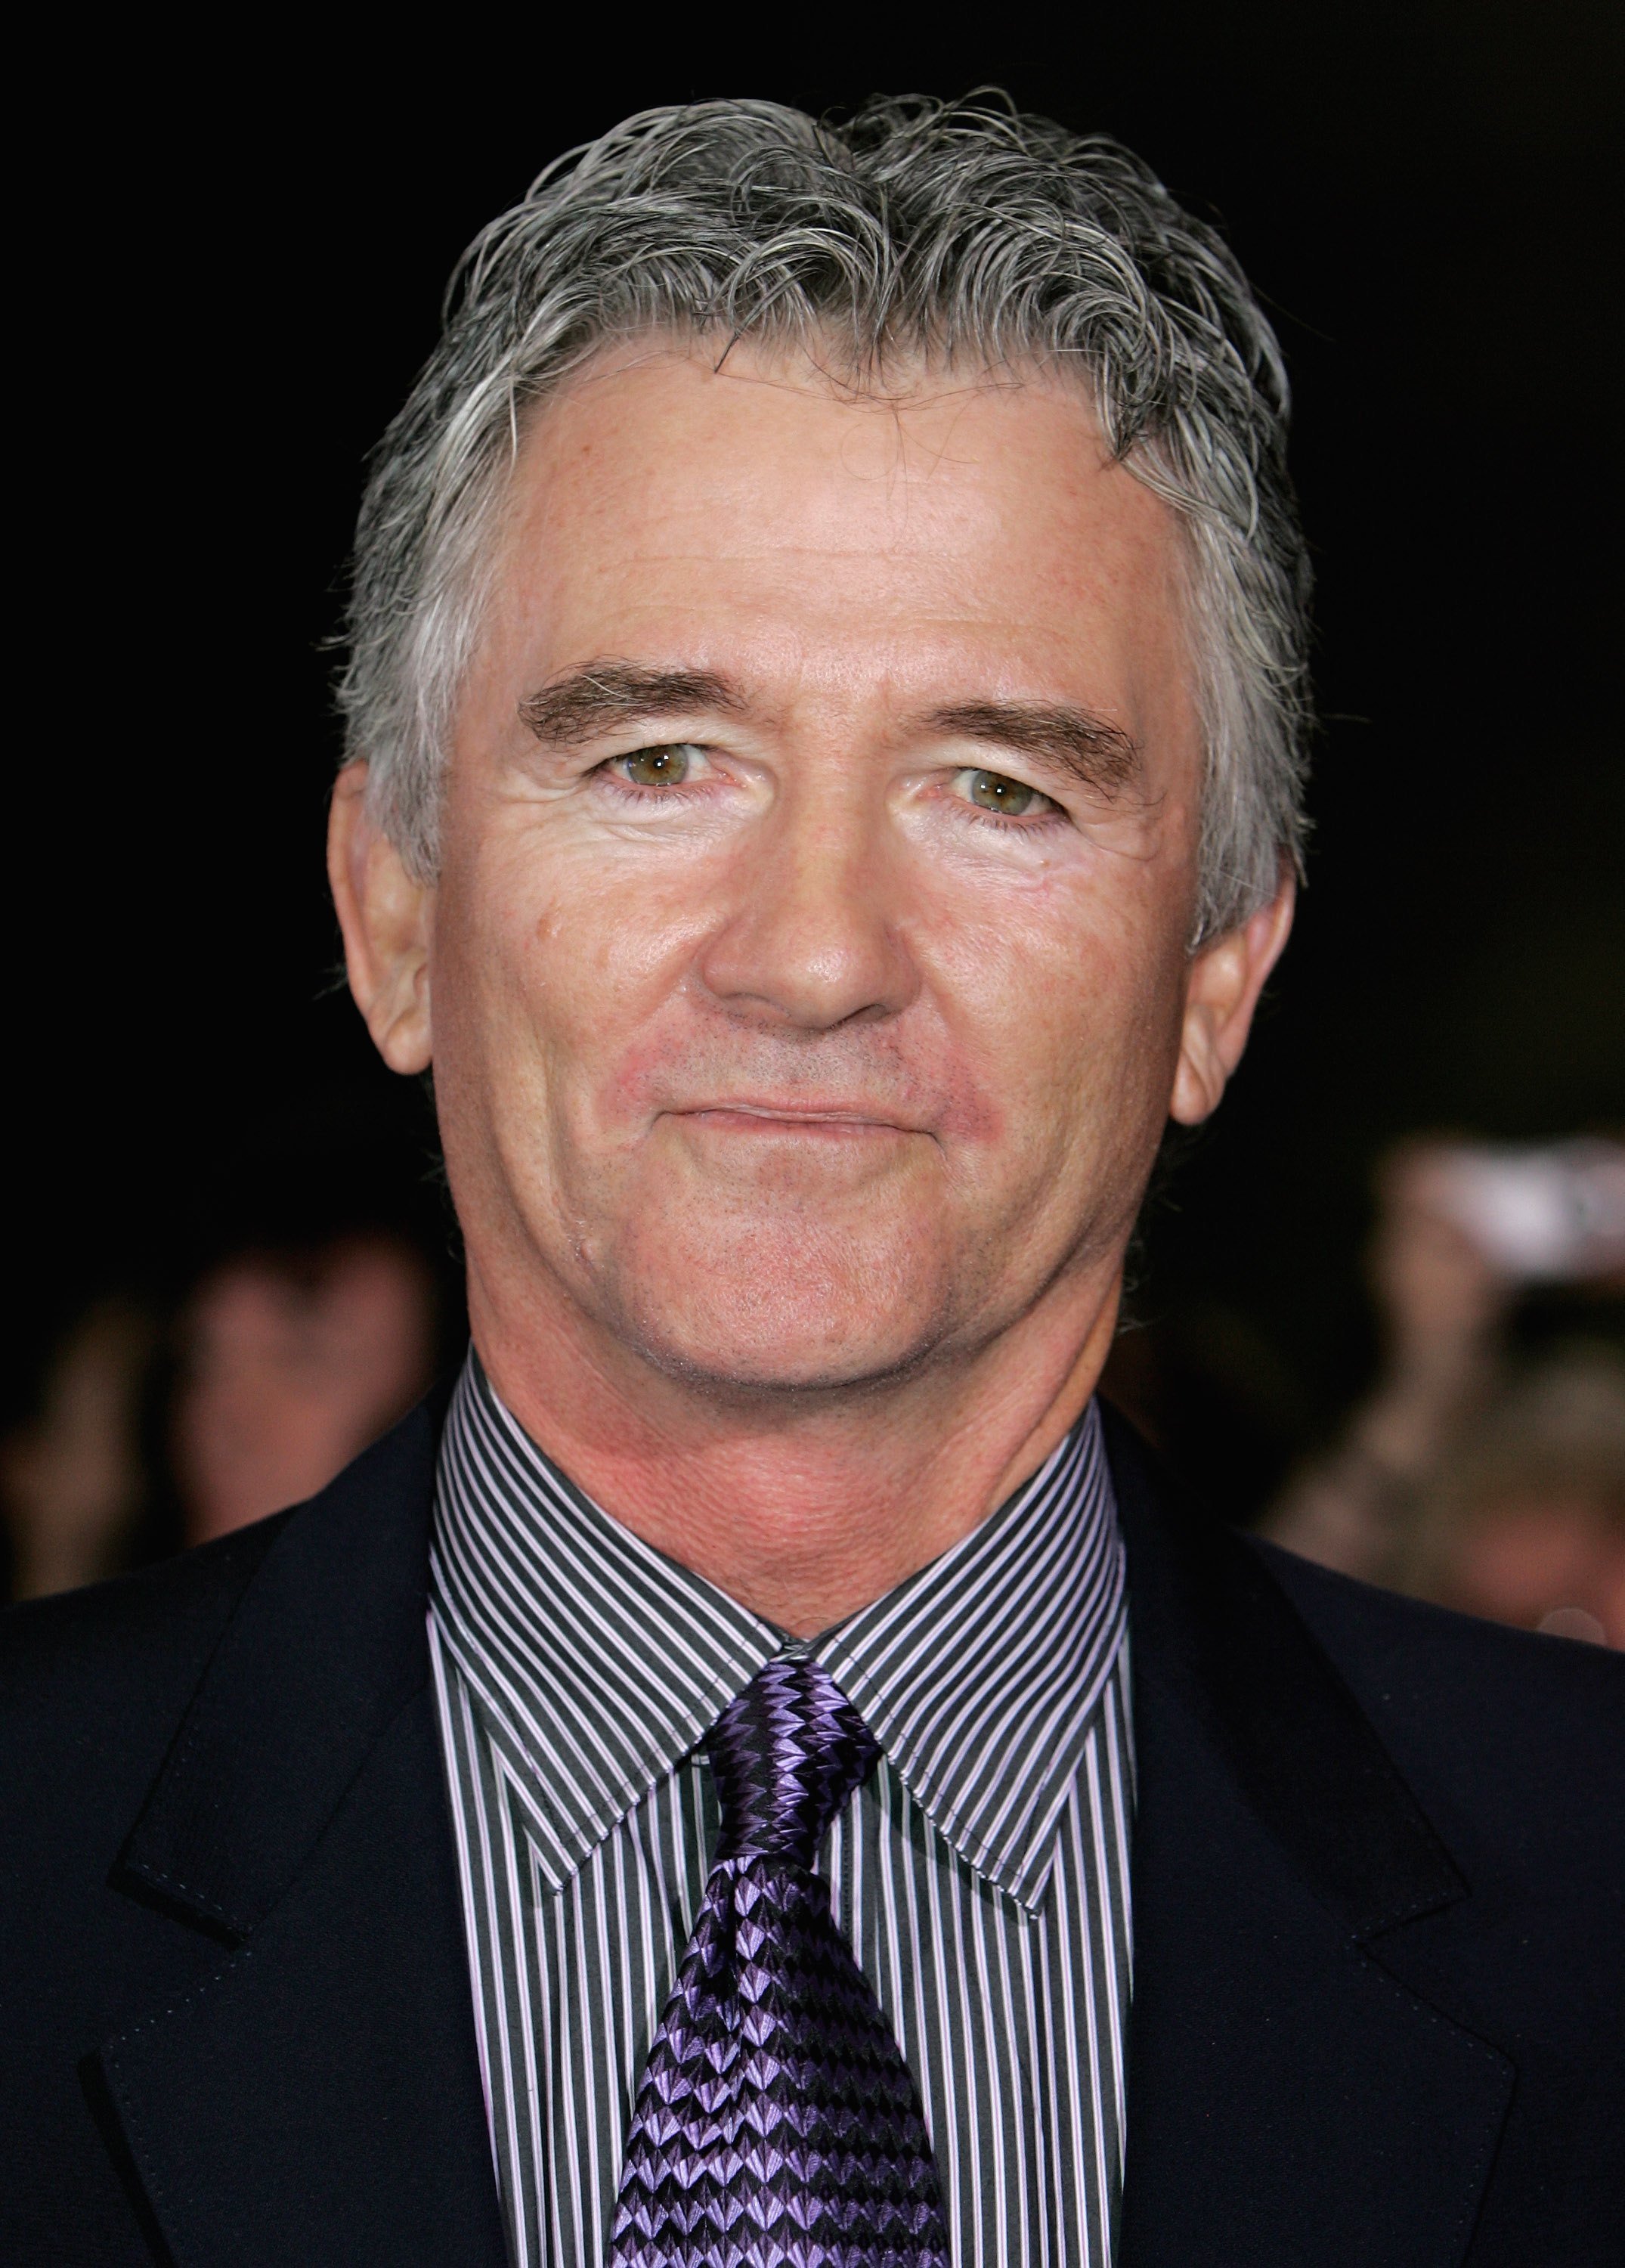 Patrick Duffy on August 26, 2006 in Newport, Wales | Source: Getty Images